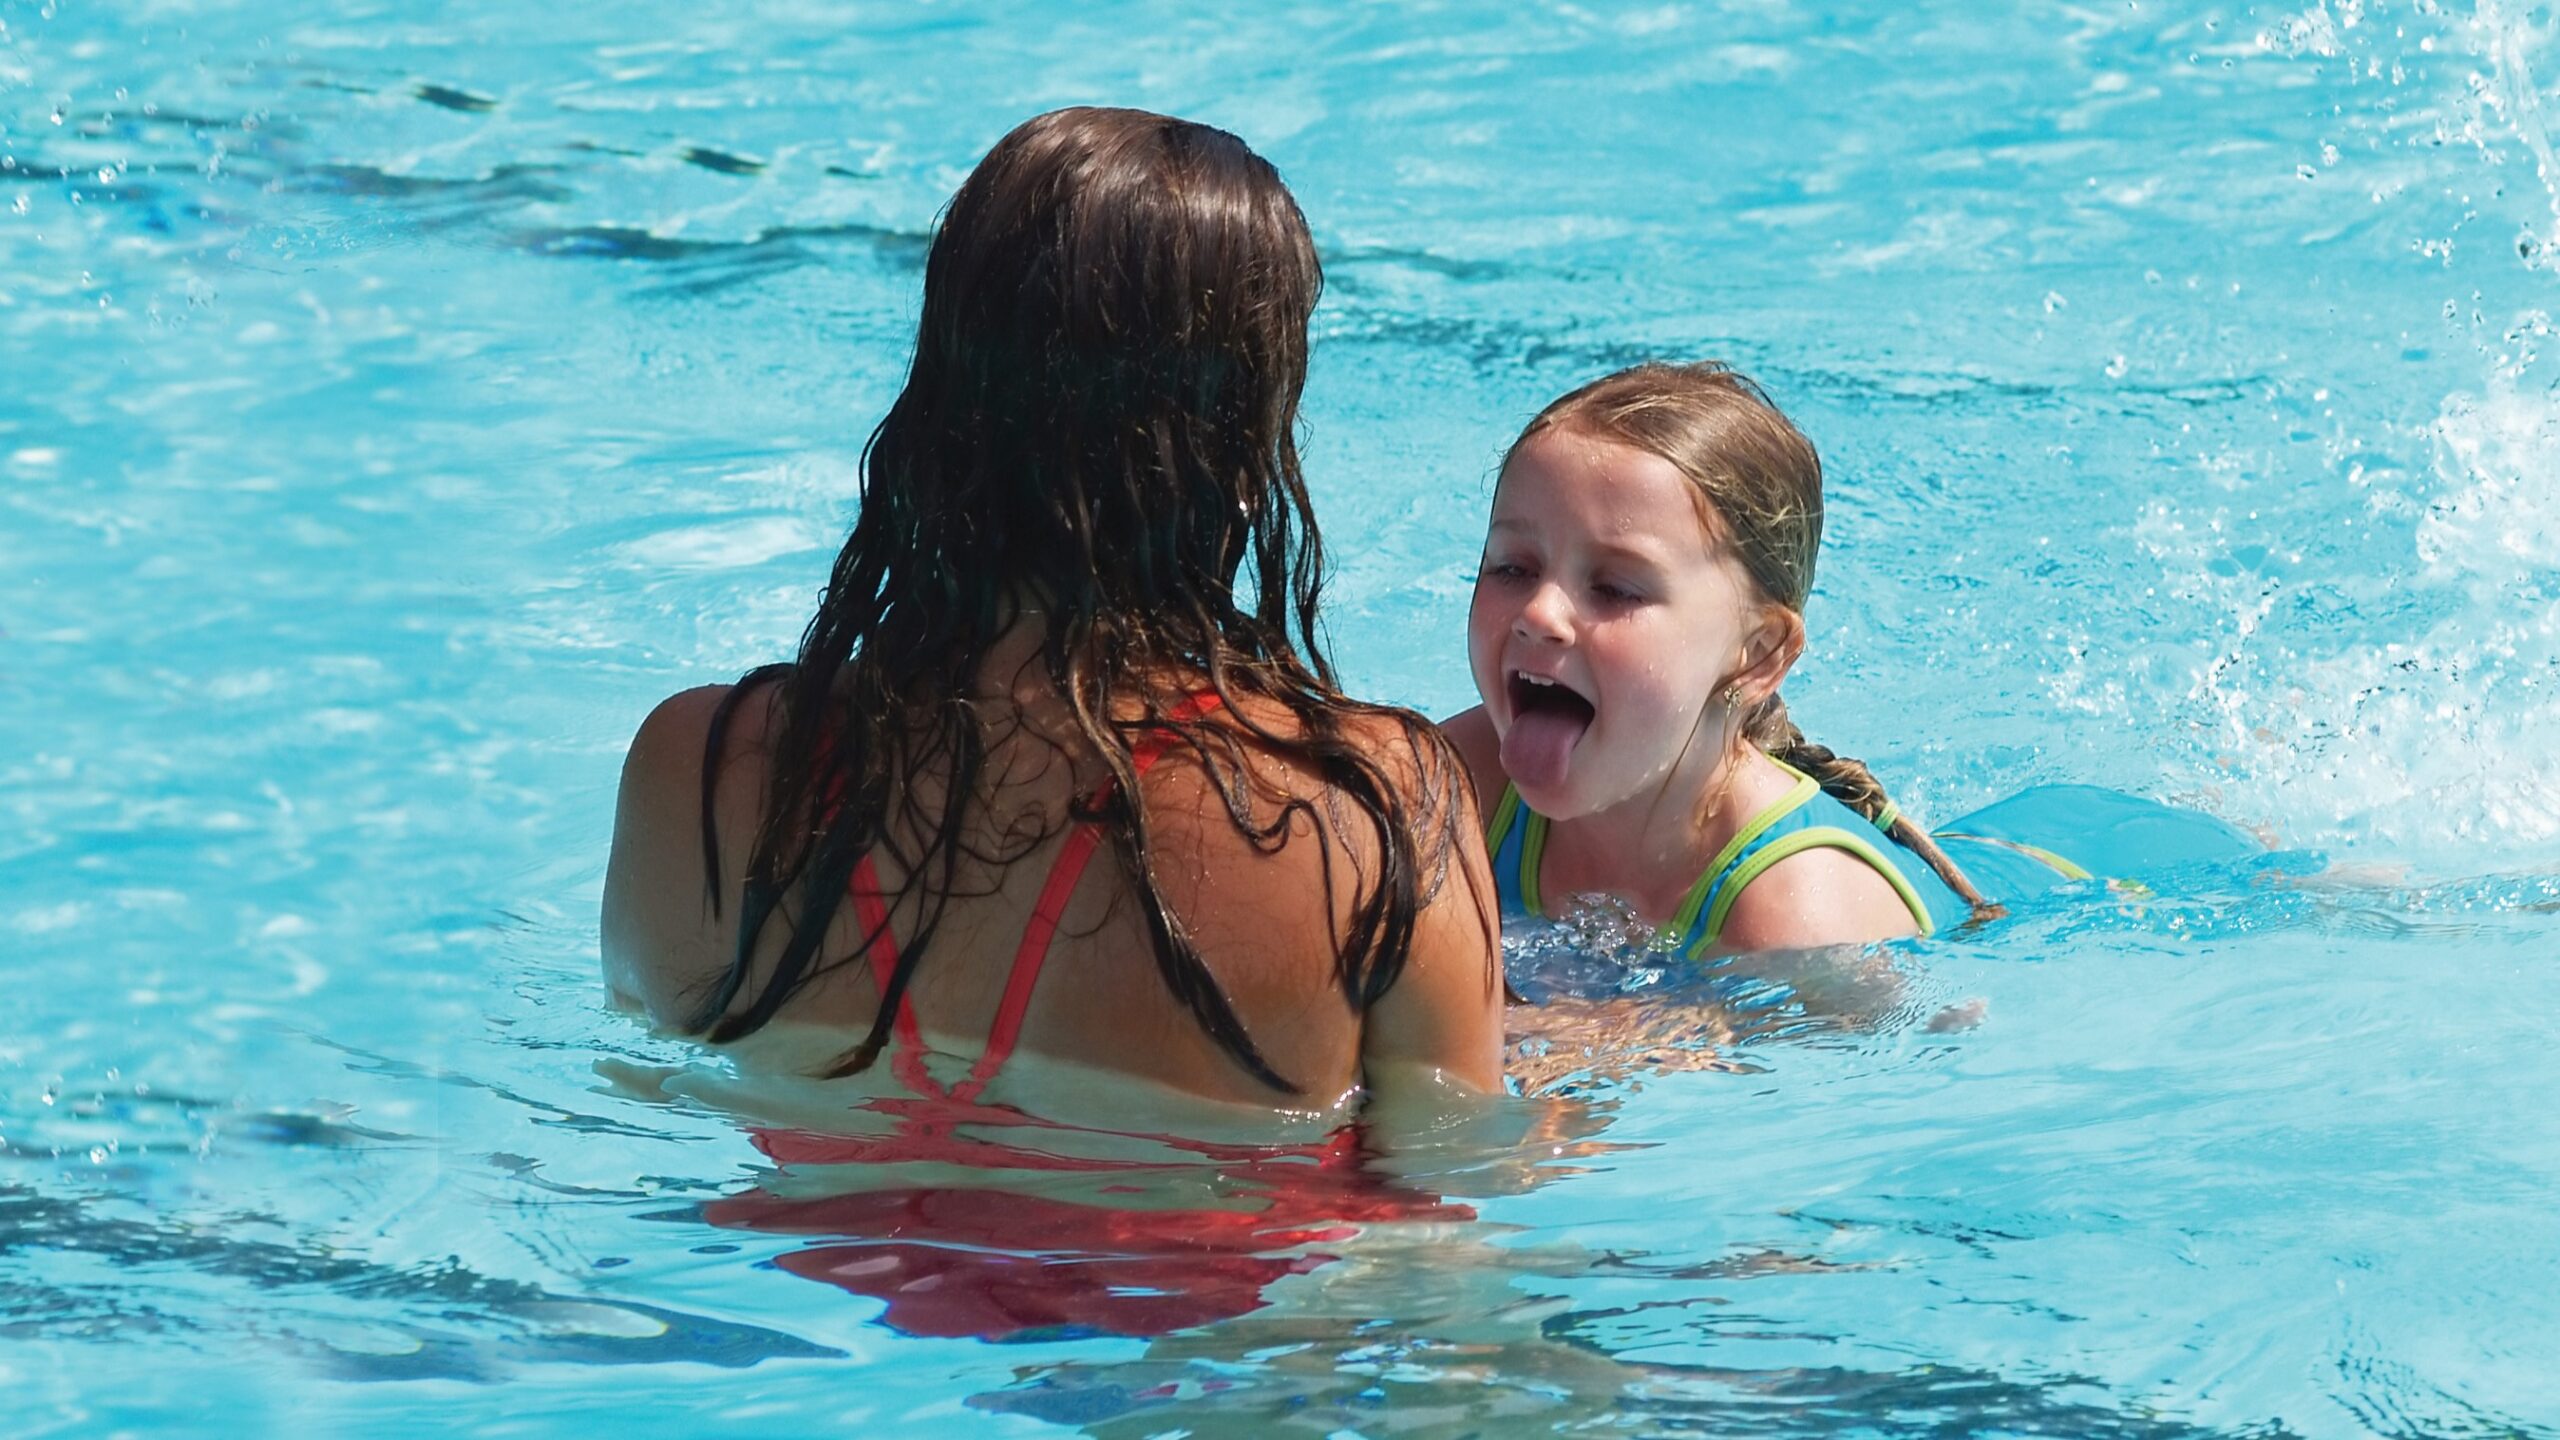 A young girl is swimming with her mother in a swimming pool.